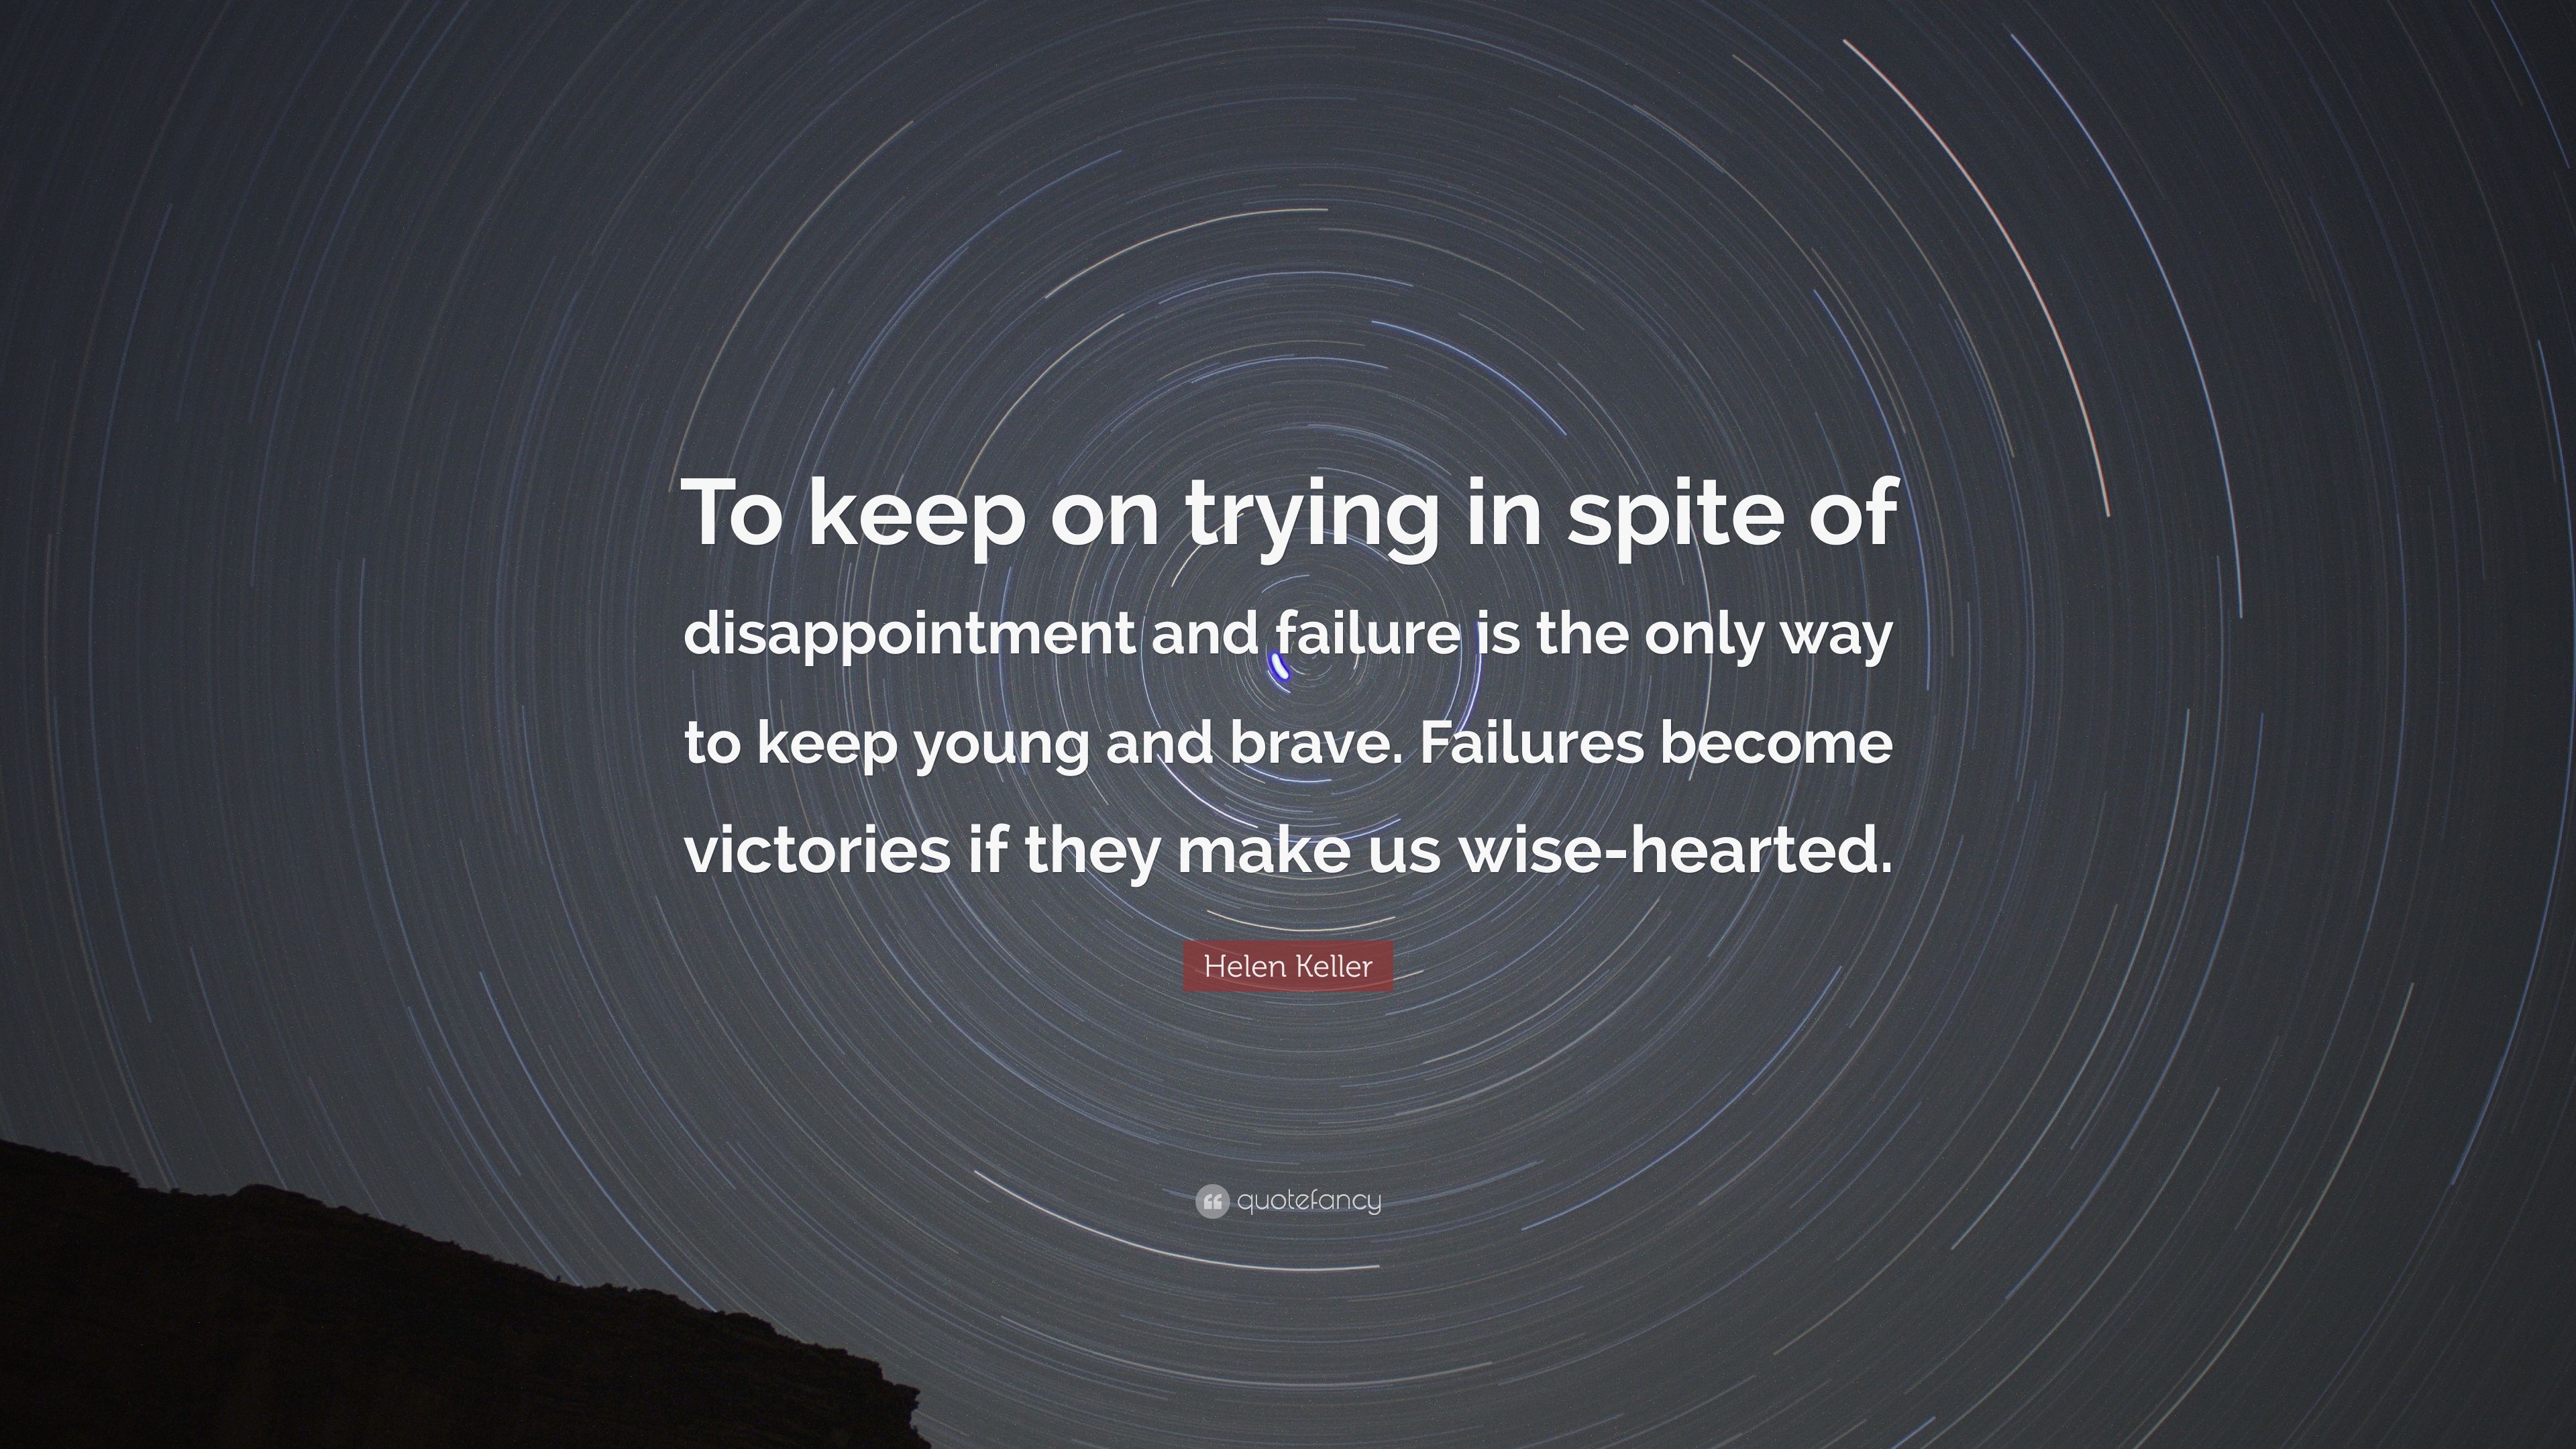 Helen Keller Quote: “To keep on trying in spite of disappointment and failure is the only way to keep young and brave. Failures become victor.” (12 wallpaper)